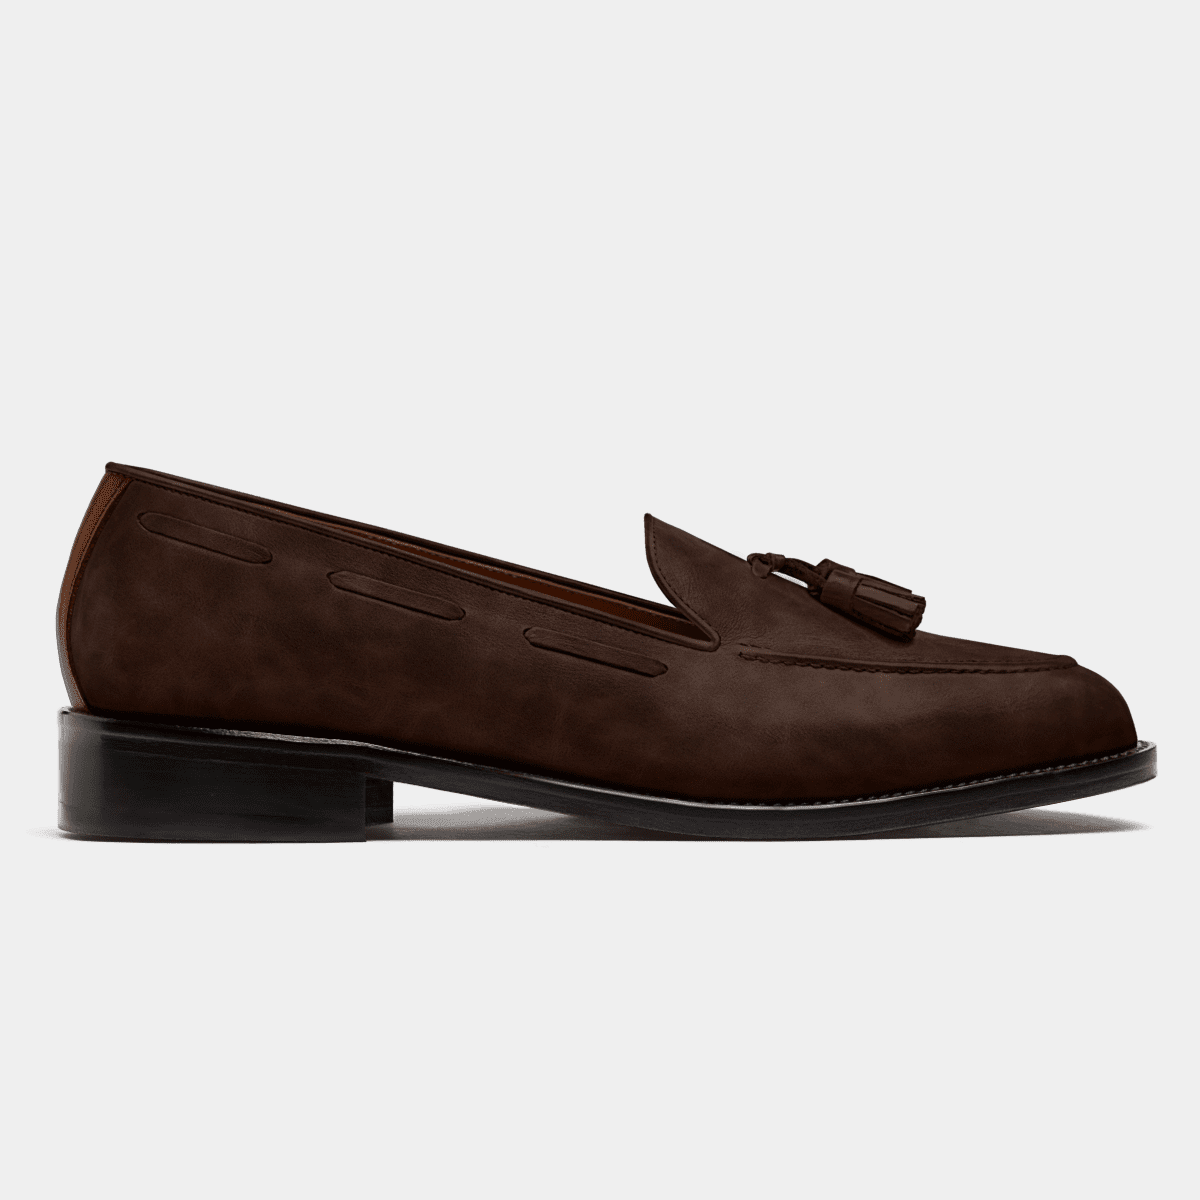 Tassel Loafers in brown waxed leather & leather